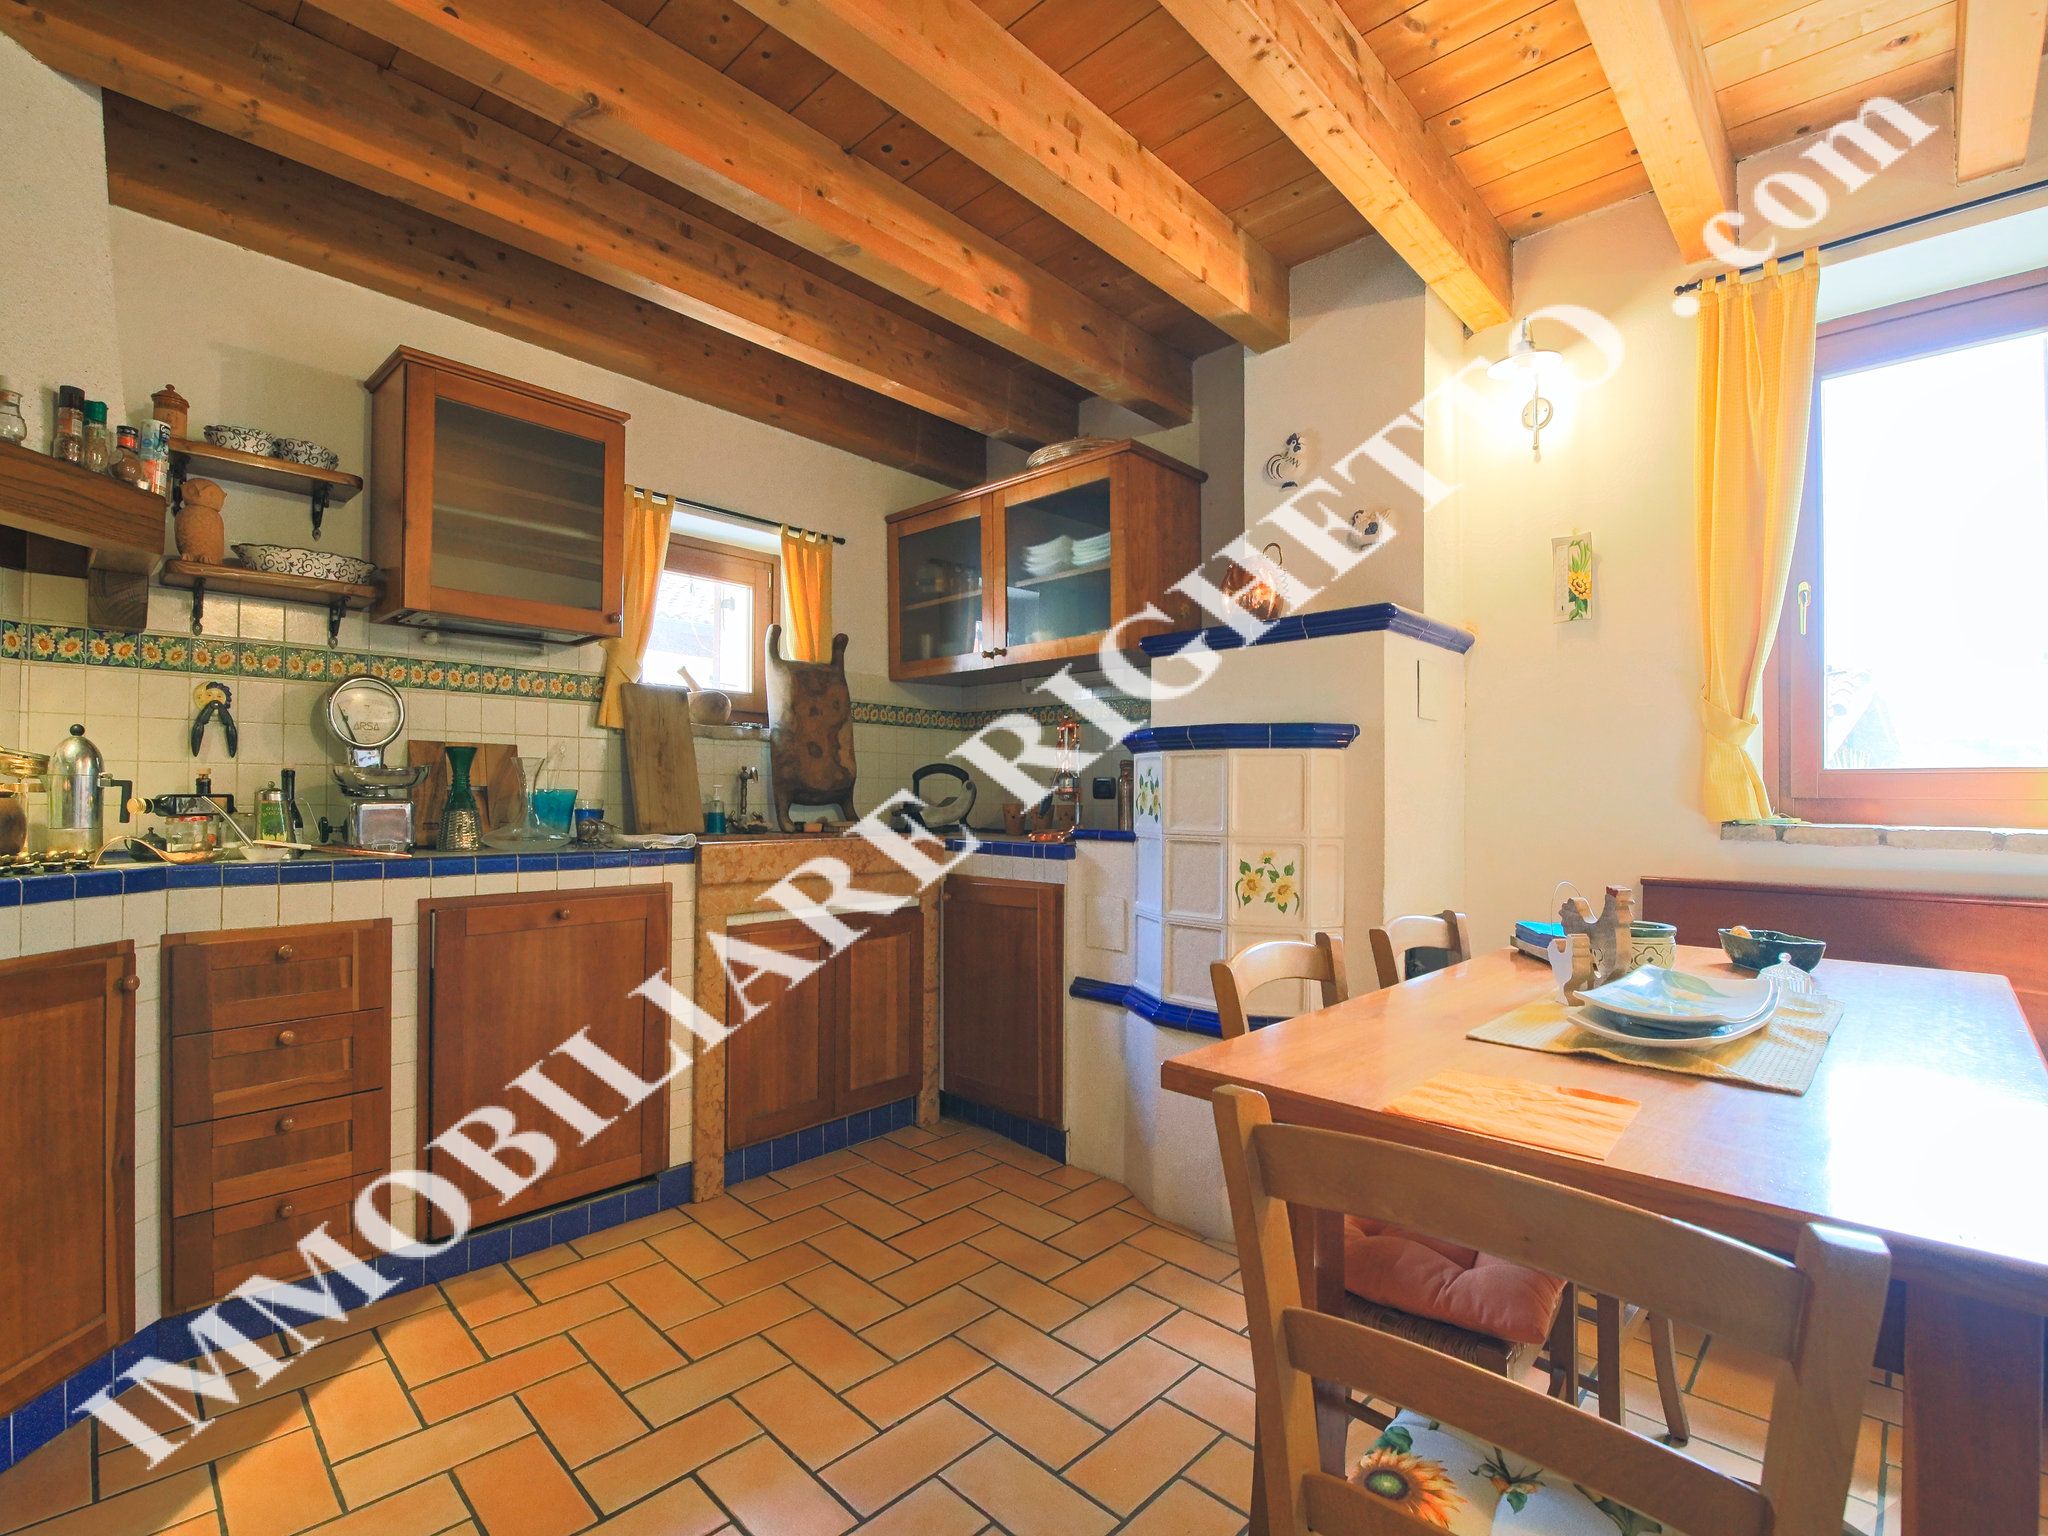 offer property for sale Spacious, fine renovated country-house.